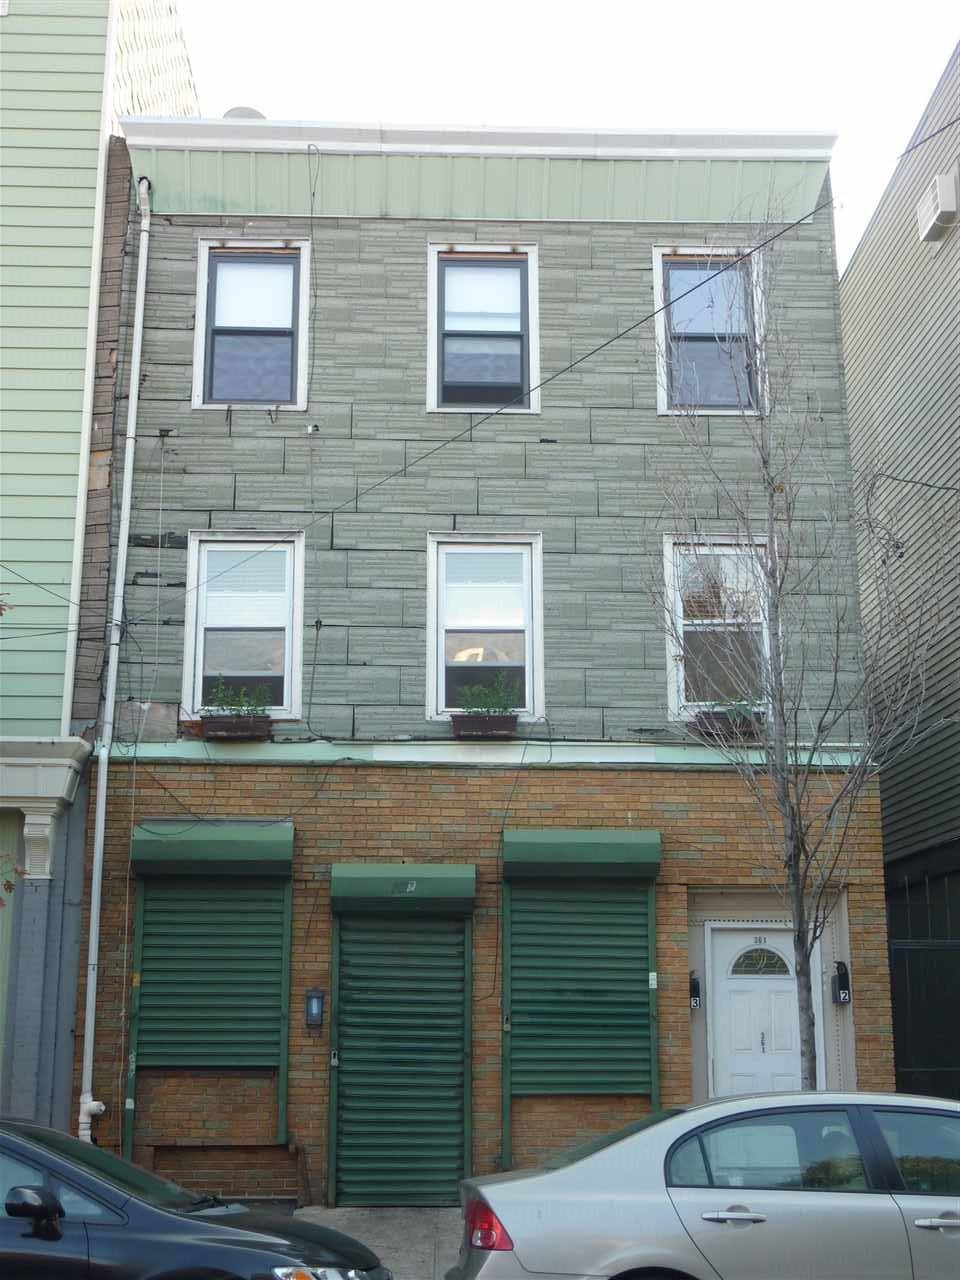 Turnkey investment opportunity downtown JC just 1/2 block off Newark Ave